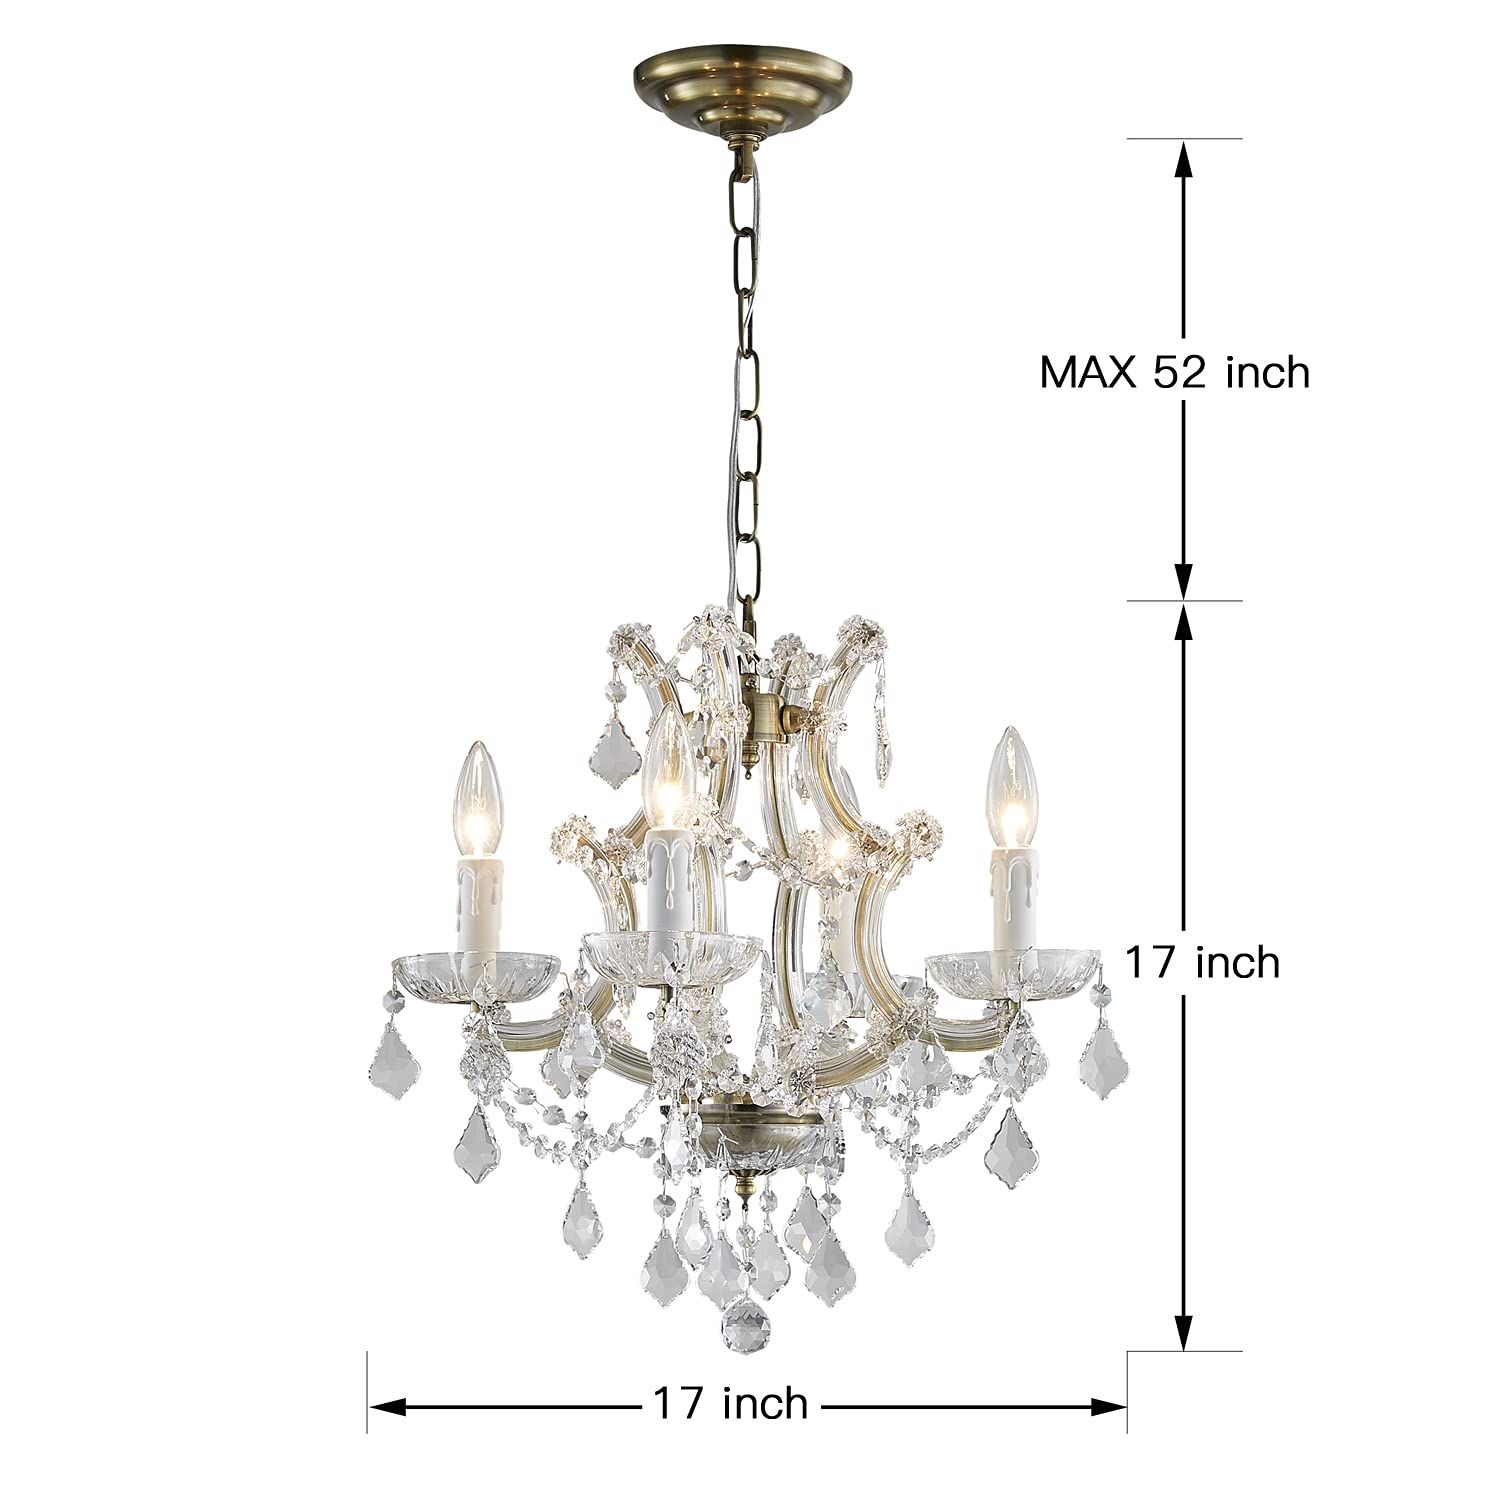 Saint Mossi 4 Light Maria Therese K9 Crystal Chandelier Light